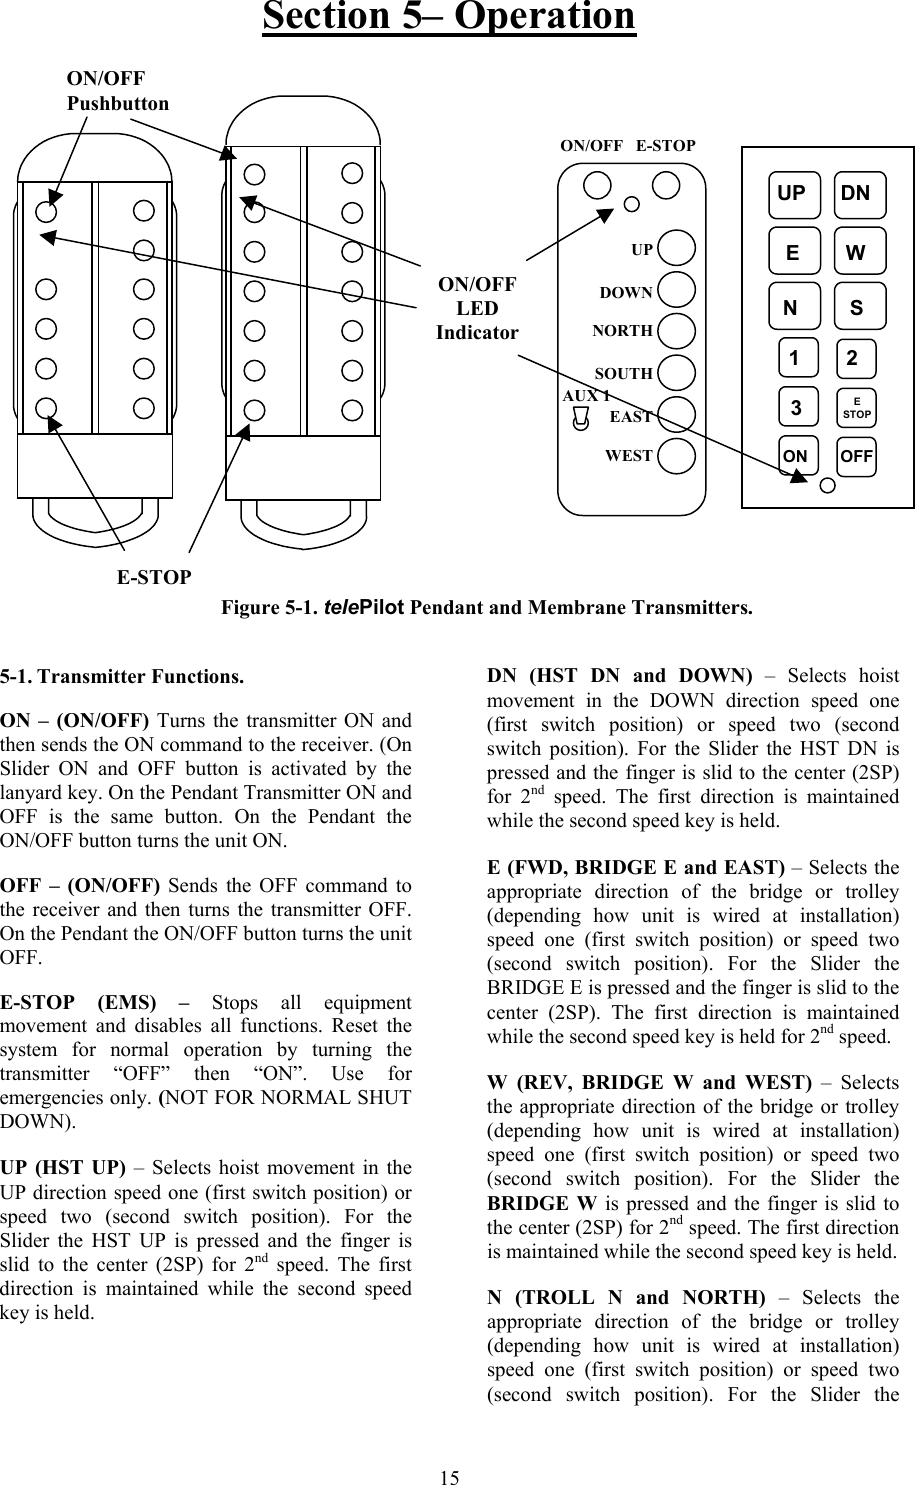 Section 5– Operation  15                           5-1. Transmitter Functions. ON – (ON/OFF) Turns the transmitter ON and then sends the ON command to the receiver. (On Slider ON and OFF button is activated by the lanyard key. On the Pendant Transmitter ON and OFF is the same button. On the Pendant the ON/OFF button turns the unit ON. OFF – (ON/OFF) Sends the OFF command to the receiver and then turns the transmitter OFF. On the Pendant the ON/OFF button turns the unit OFF. E-STOP (EMS) – Stops all equipment movement and disables all functions. Reset the system for normal operation by turning the transmitter “OFF” then “ON”. Use for emergencies only. (NOT FOR NORMAL SHUT DOWN). UP (HST UP) – Selects hoist movement in the UP direction speed one (first switch position) or speed two (second switch position). For the Slider the HST UP is pressed and the finger is slid to the center (2SP) for 2nd speed. The first direction is maintained while the second speed key is held.               DN (HST DN and DOWN) – Selects hoist movement in the DOWN direction speed one (first switch position) or speed two (second switch position). For the Slider the HST DN is pressed and the finger is slid to the center (2SP) for 2nd speed. The first direction is maintained while the second speed key is held. E (FWD, BRIDGE E and EAST) – Selects the appropriate direction of the bridge or trolley (depending how unit is wired at installation) speed one (first switch position) or speed two (second switch position). For the Slider the BRIDGE E is pressed and the finger is slid to the center (2SP). The first direction is maintained while the second speed key is held for 2nd speed. W (REV, BRIDGE W and WEST) – Selects the appropriate direction of the bridge or trolley (depending how unit is wired at installation) speed one (first switch position) or speed two (second switch position). For the Slider the BRIDGE W is pressed and the finger is slid to the center (2SP) for 2nd speed. The first direction is maintained while the second speed key is held. N (TROLL N and NORTH) – Selects the appropriate direction of the bridge or trolley (depending how unit is wired at installation) speed one (first switch position) or speed two (second switch position). For the Slider the    UP      DN         E        W        N         S        1        2        3             ON       OFF  E STOP  AUX 1 UPDOWNNORTHSOUTHEASTWESTON/OFF   E-STOP ON/OFF LED Indicator Figure 5-1. telePilot Pendant and Membrane Transmitters. ON/OFF Pushbutton E-STOP 